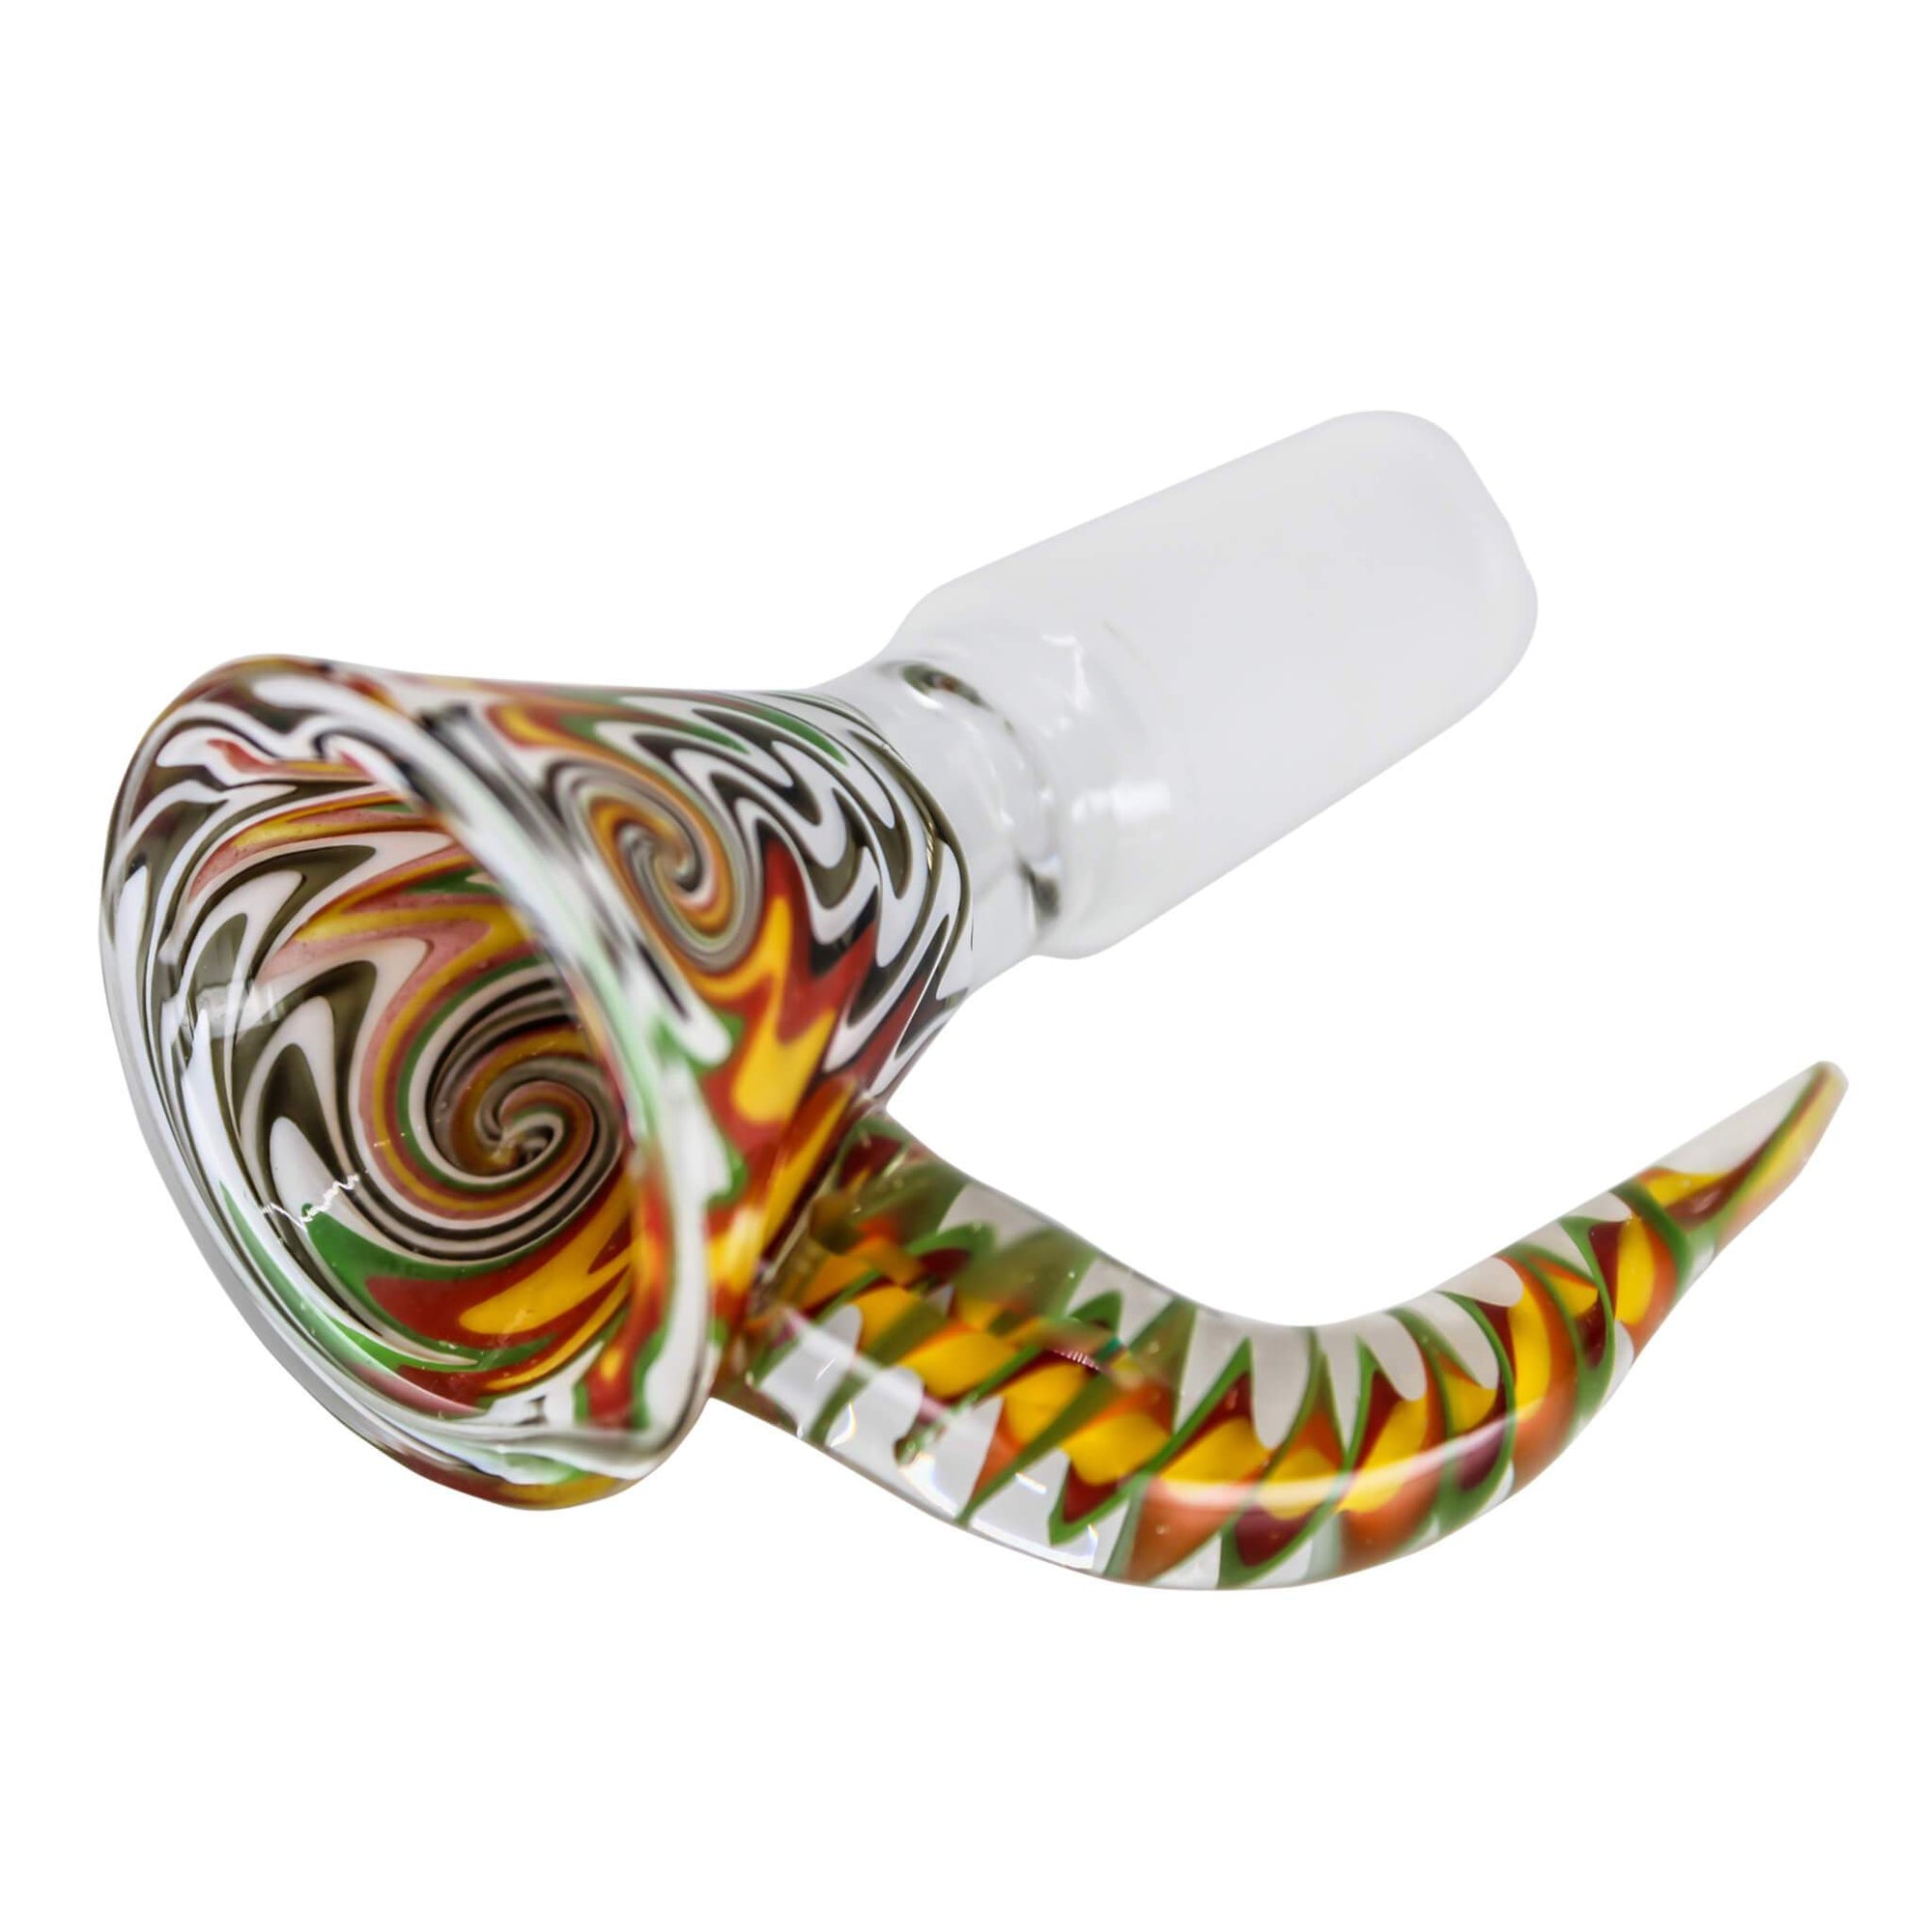 Trippy Dragon Tail Flower Bowl | Angled Prone View | Dabbing Warehouse